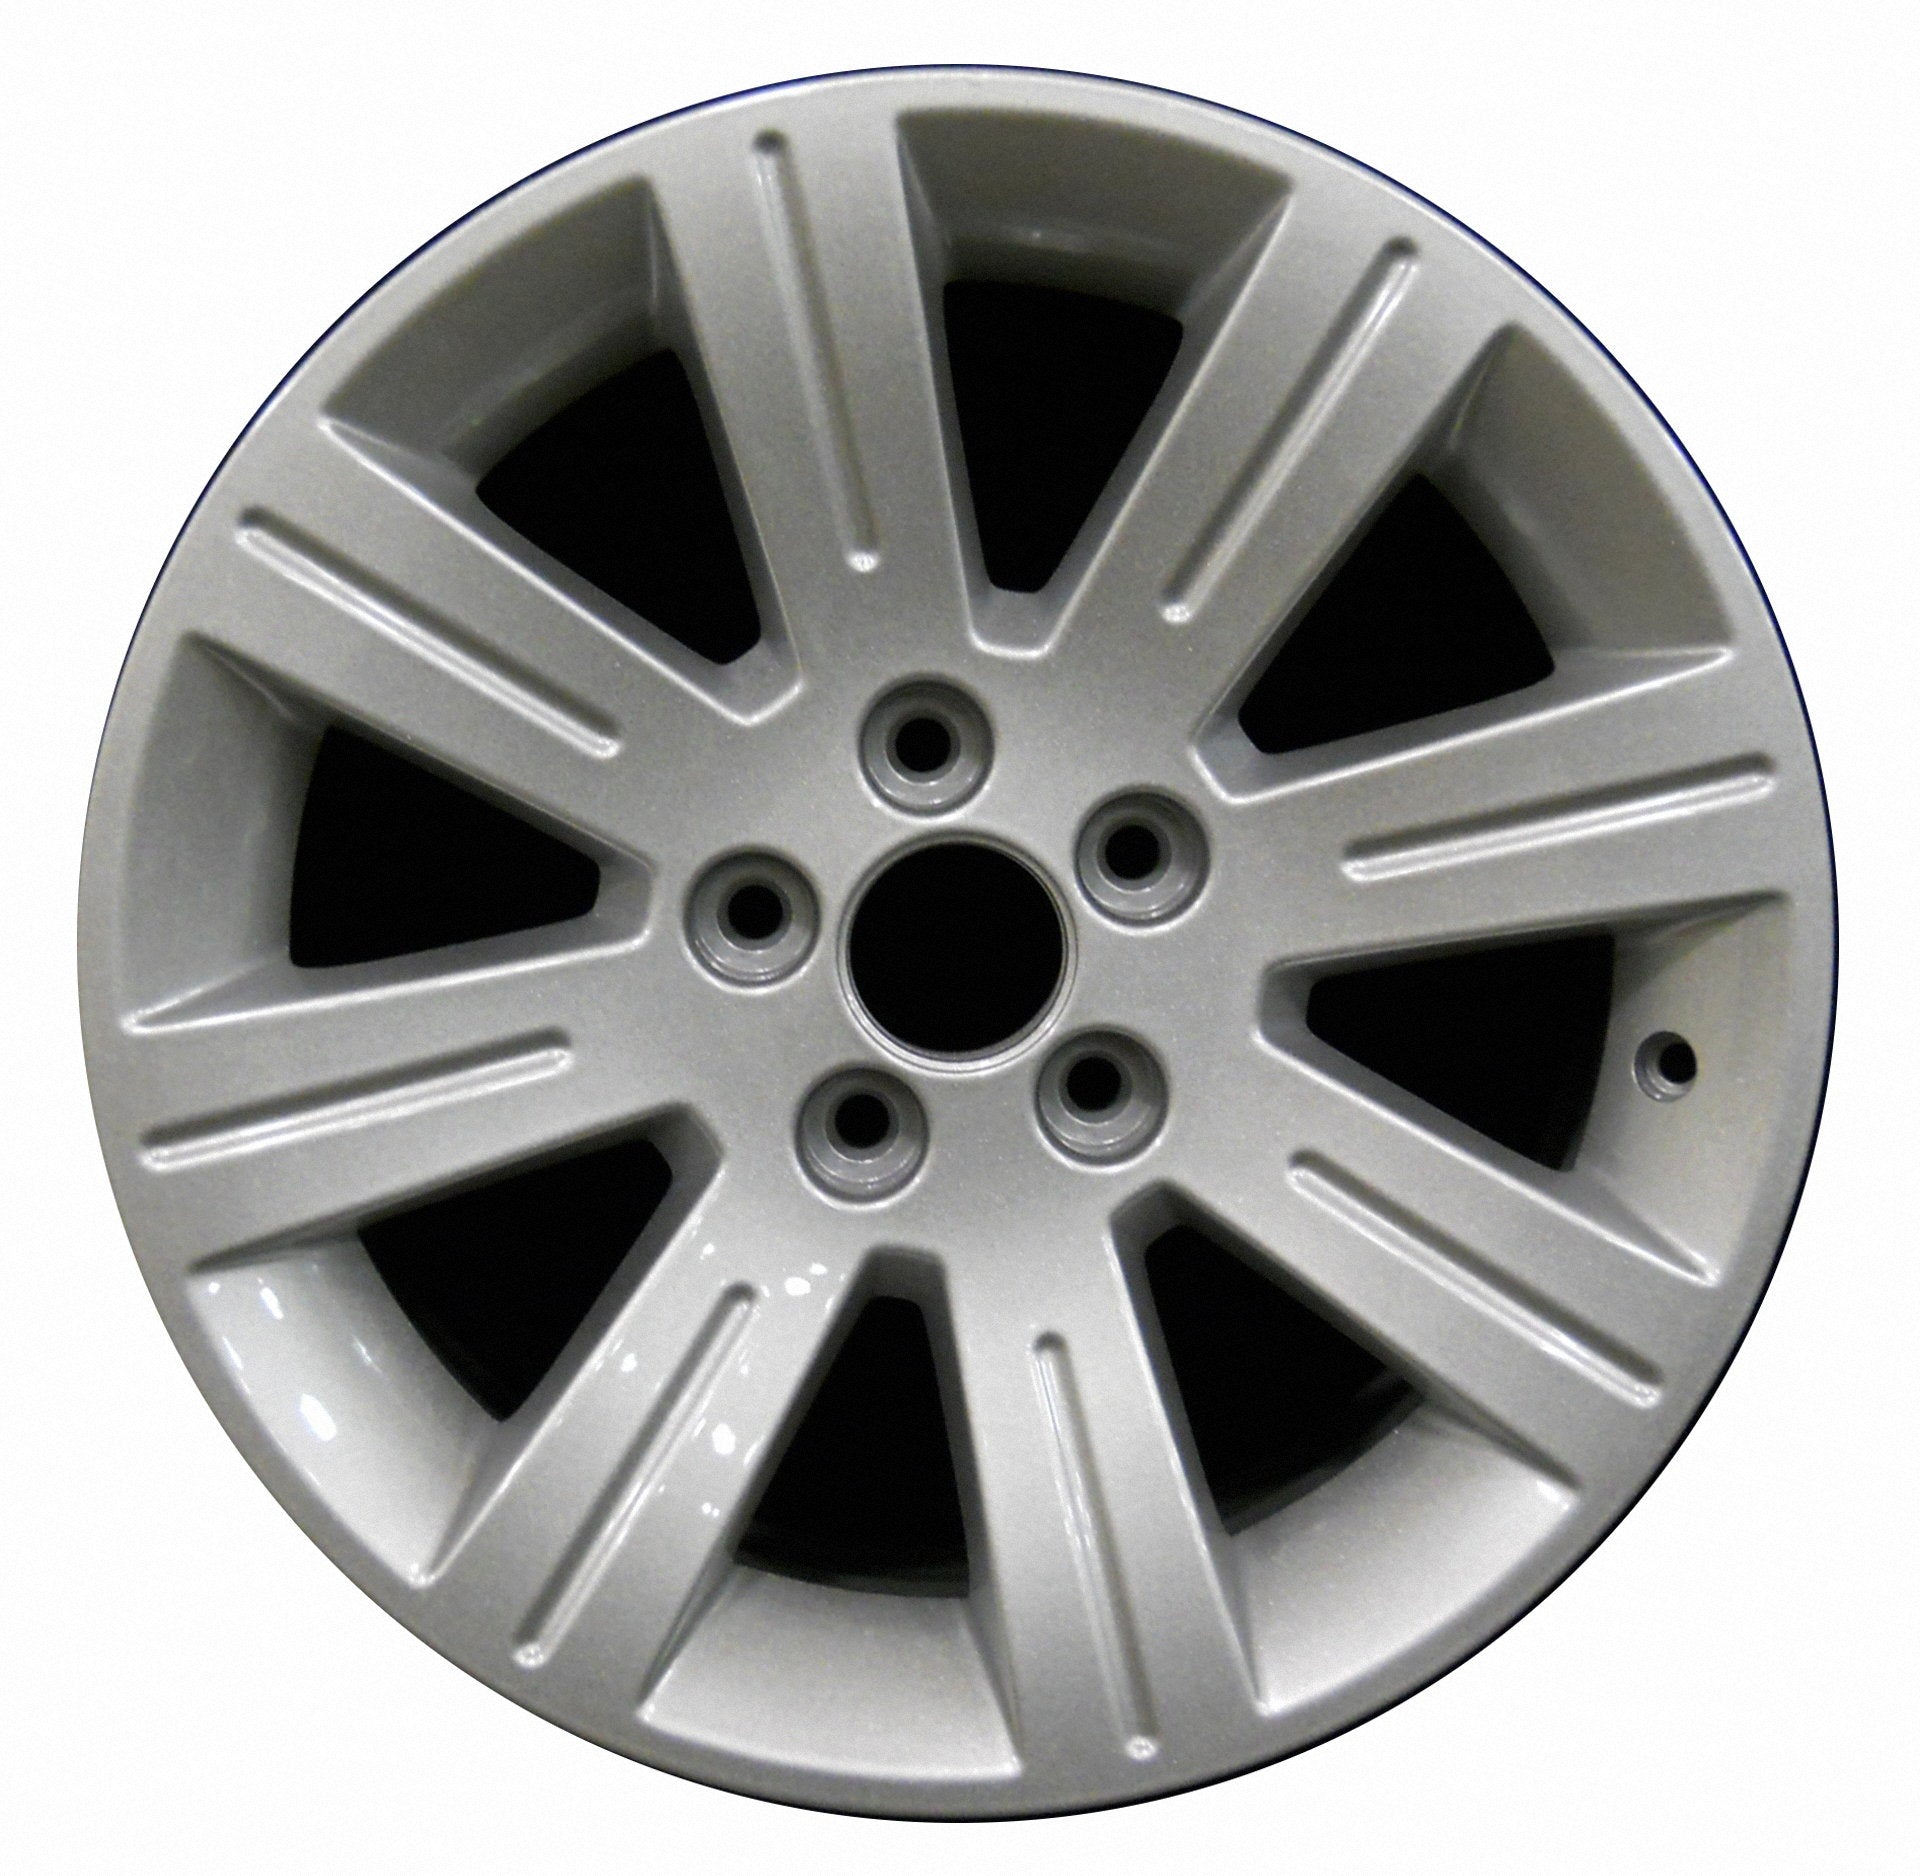 Ford Taurus  2010, 2011, 2012 Factory OEM Car Wheel Size 17x7.5 Alloy WAO.3816.PS08.FF